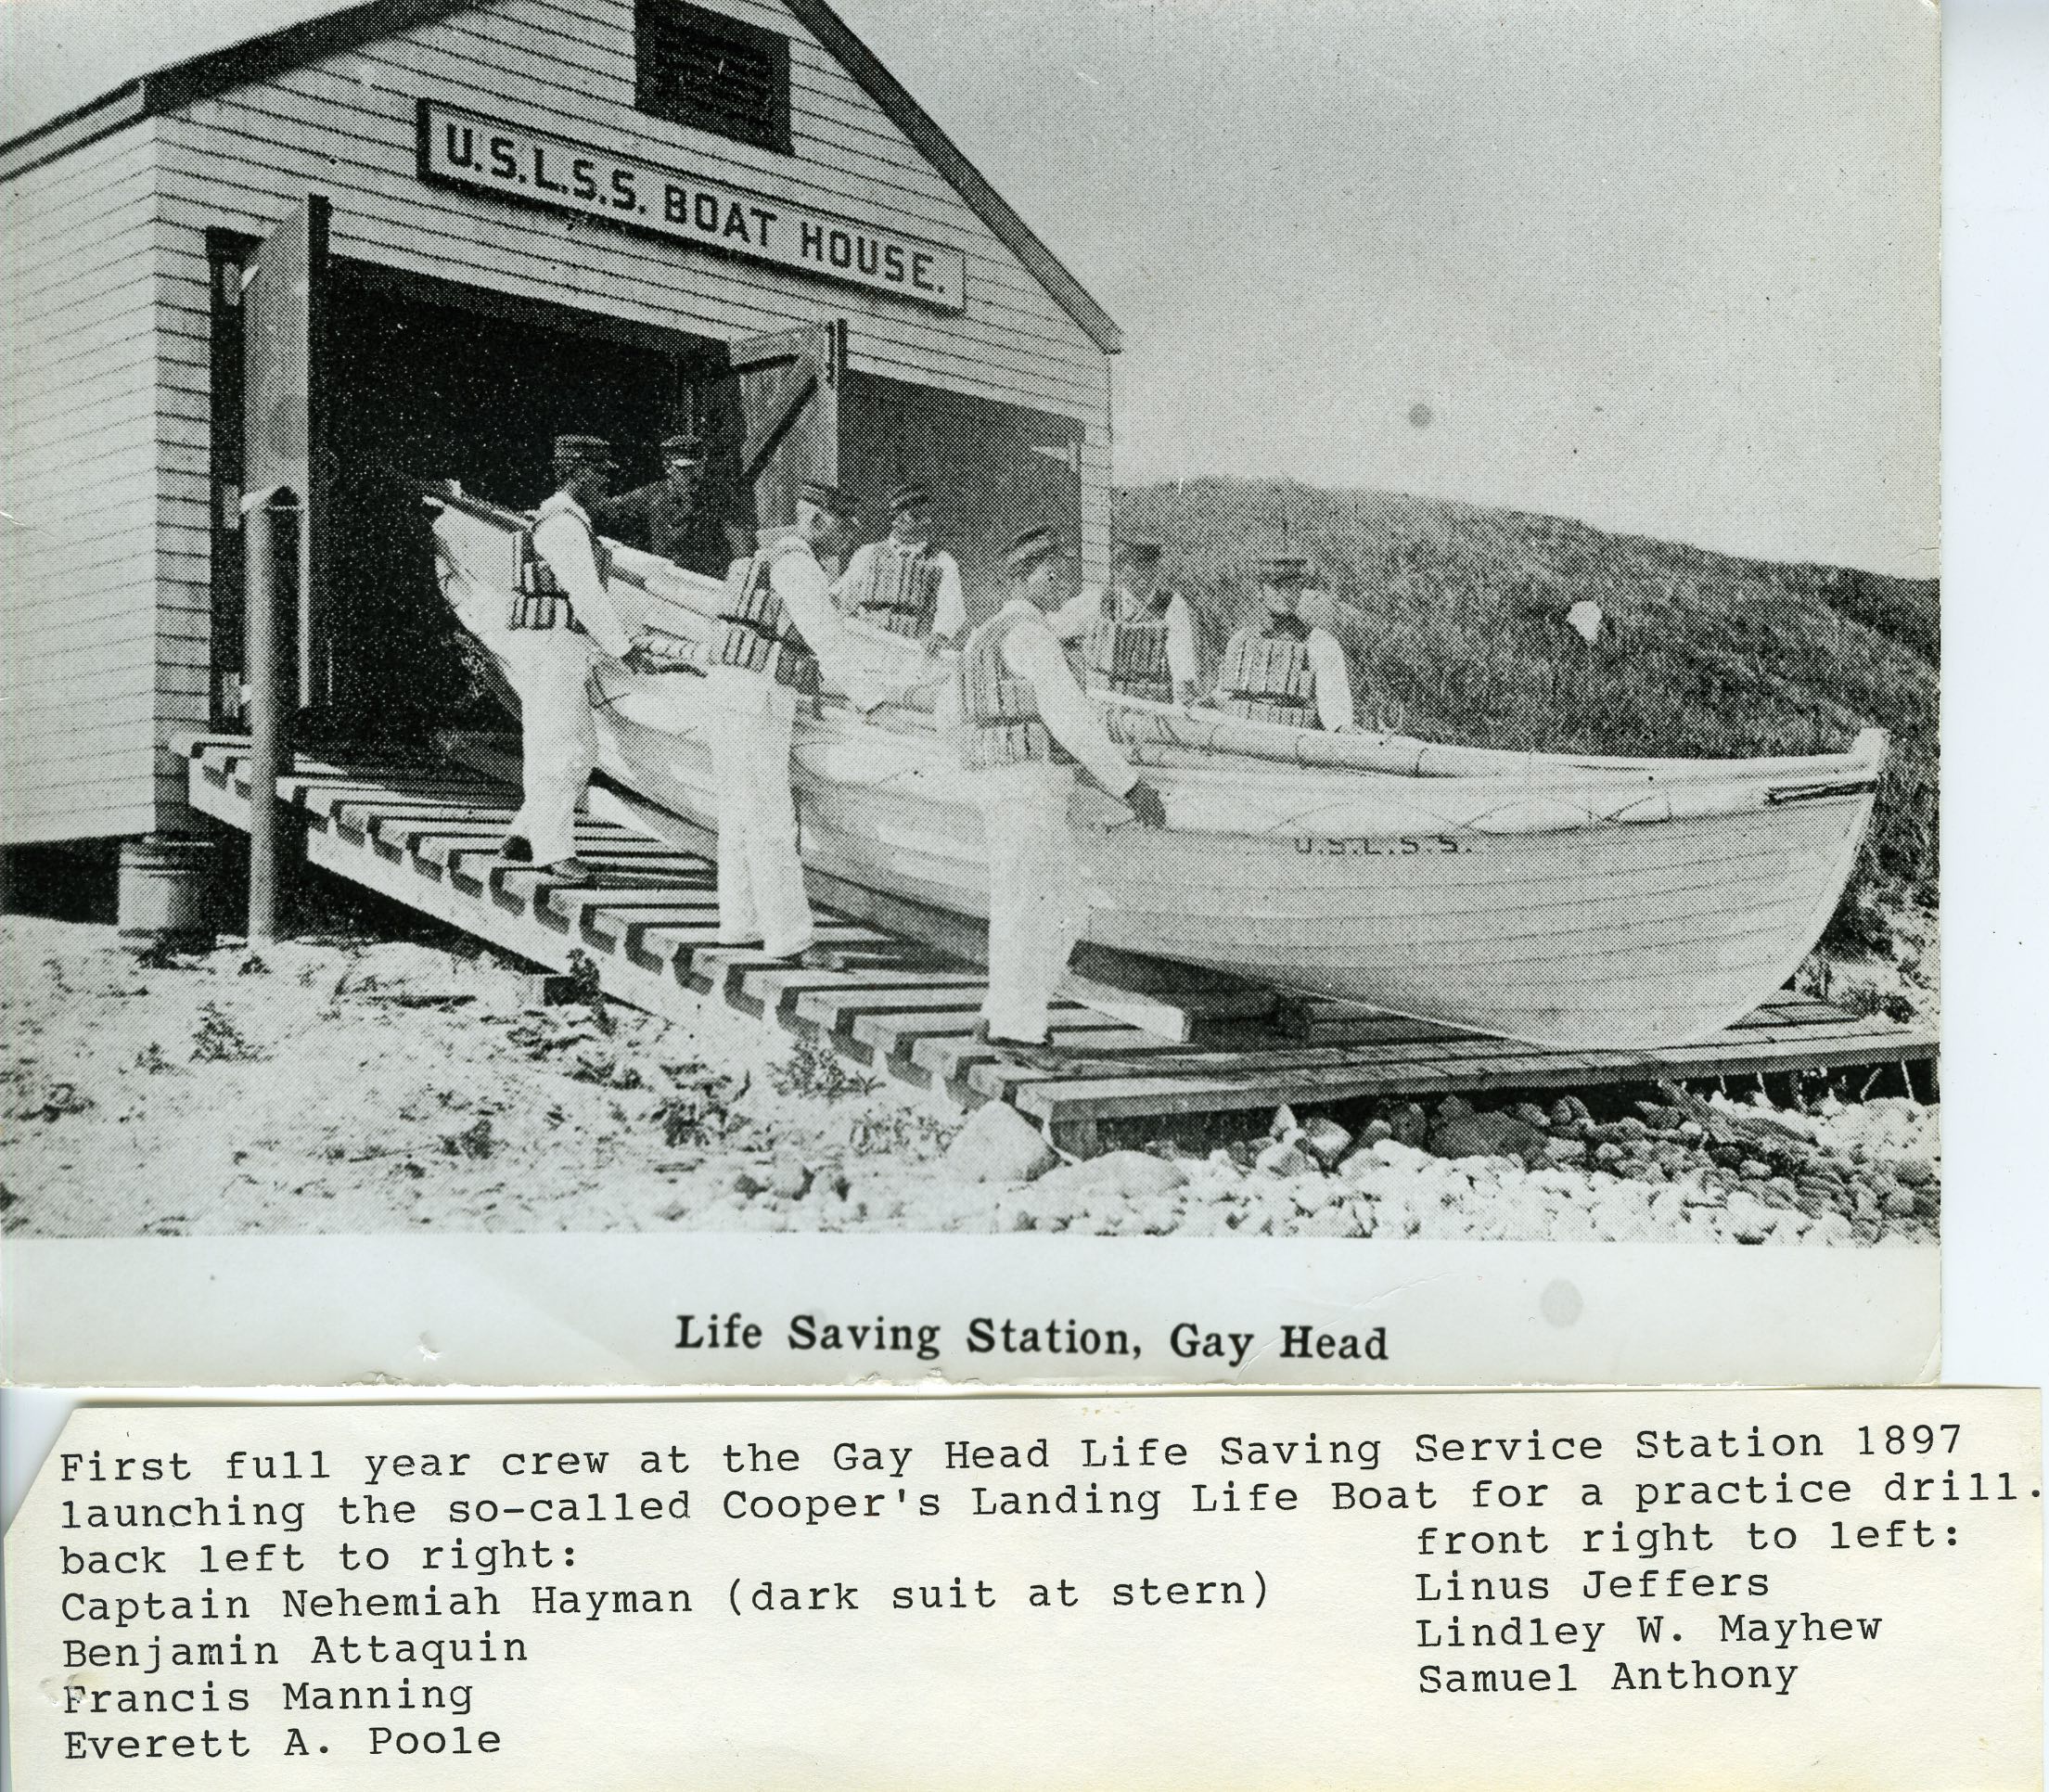 Original Members of the Gay Head Lifesaving Station, including Surfman Samuel Anthony (Courtesy of the Martha’s Vineyard Museum)